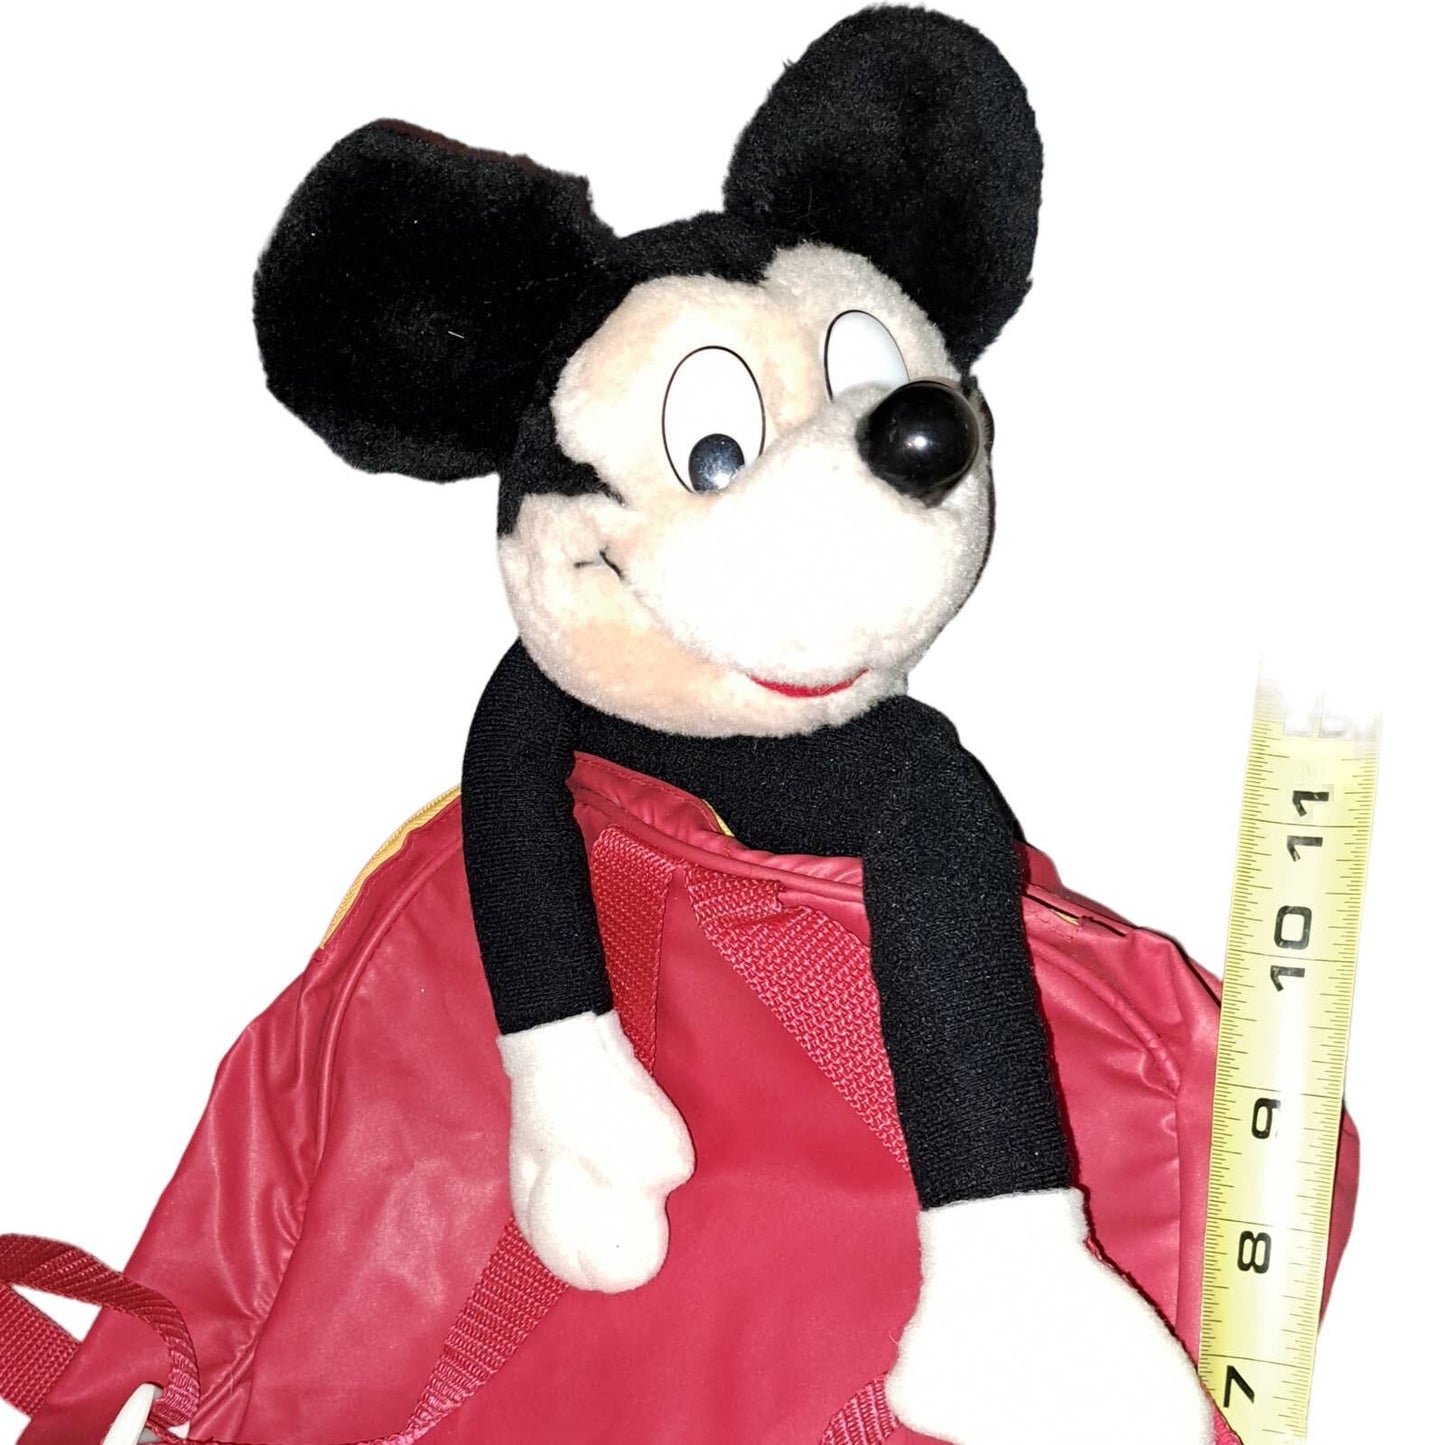 SALE!!! Mickey Mouse toddler Backpack